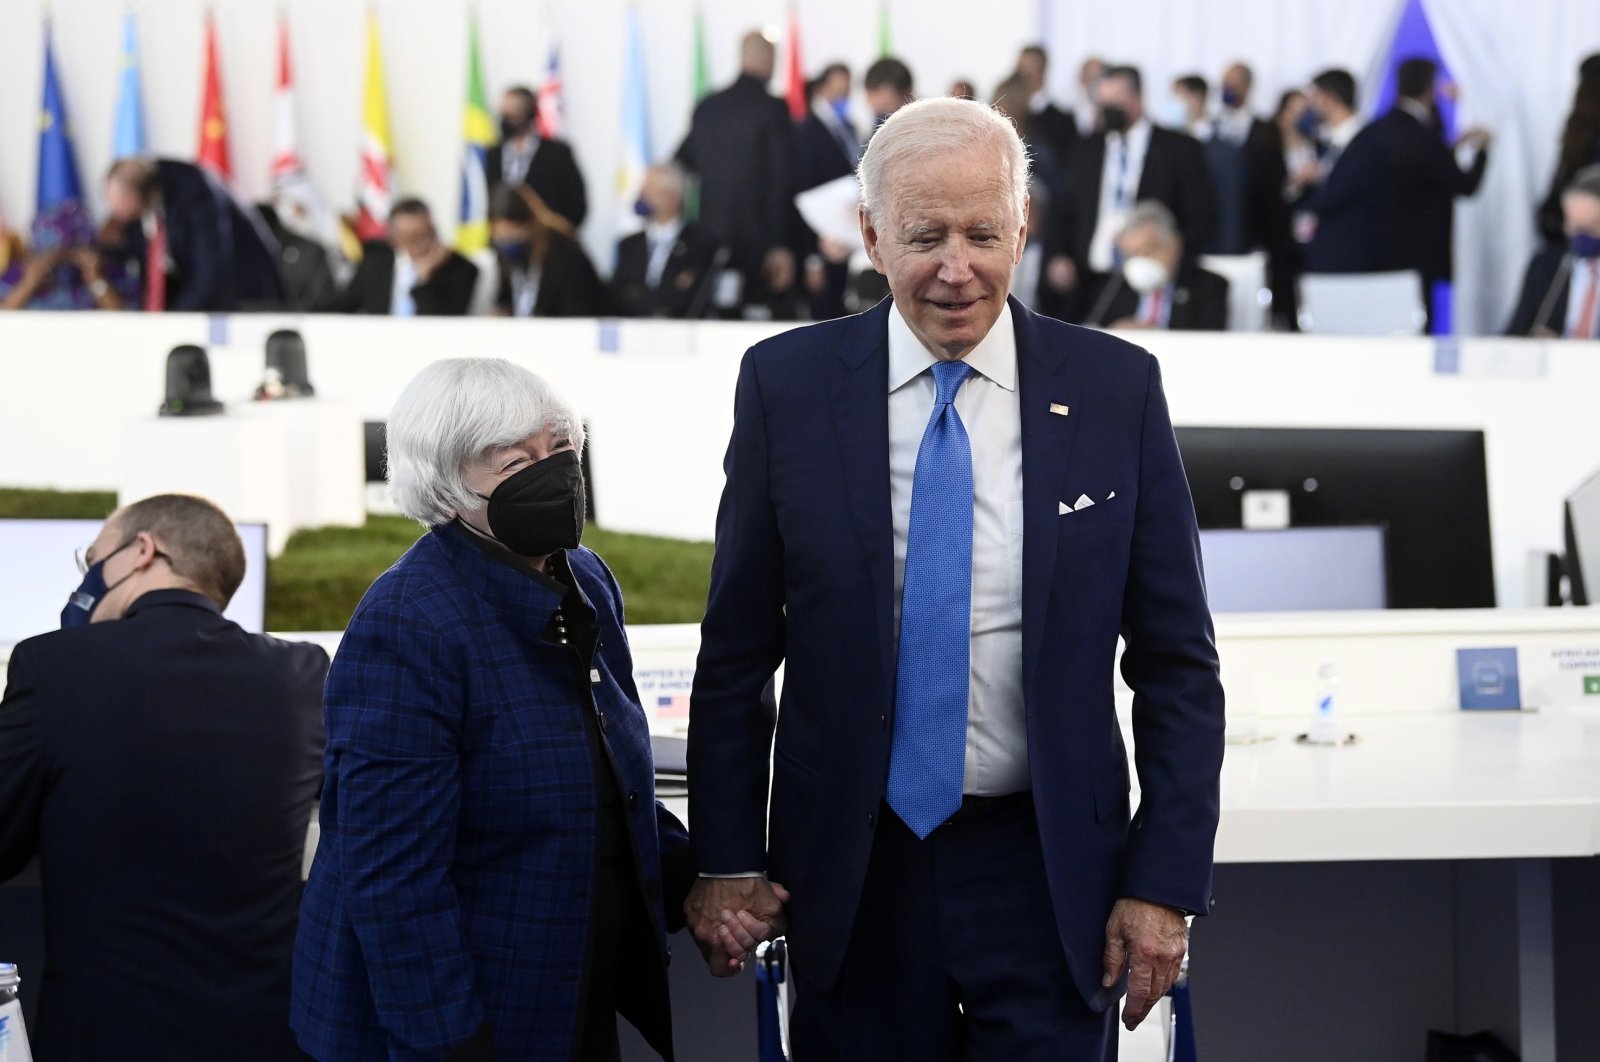 U.S. President Joe Biden (R) with U.S. Secretary of the Treasury Janet Yellen (2L) during the plenary session at the G-20 Summit in Rome, Italy, Oct. 30, 2021, to discuss climate change, COVID-19 and the post-pandemic global recovery. (EPA Photo)